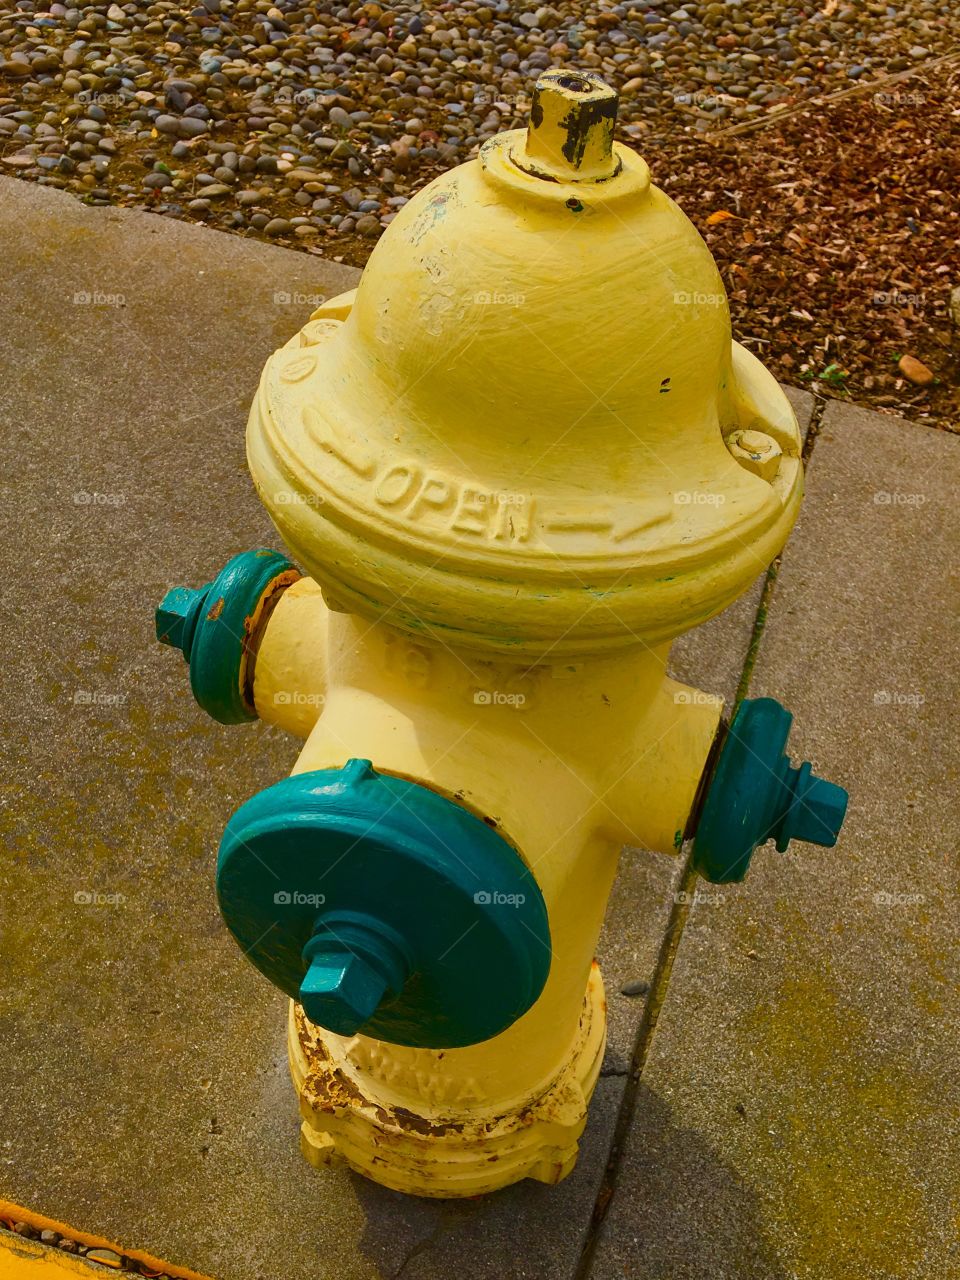 Fire hydrant yellow